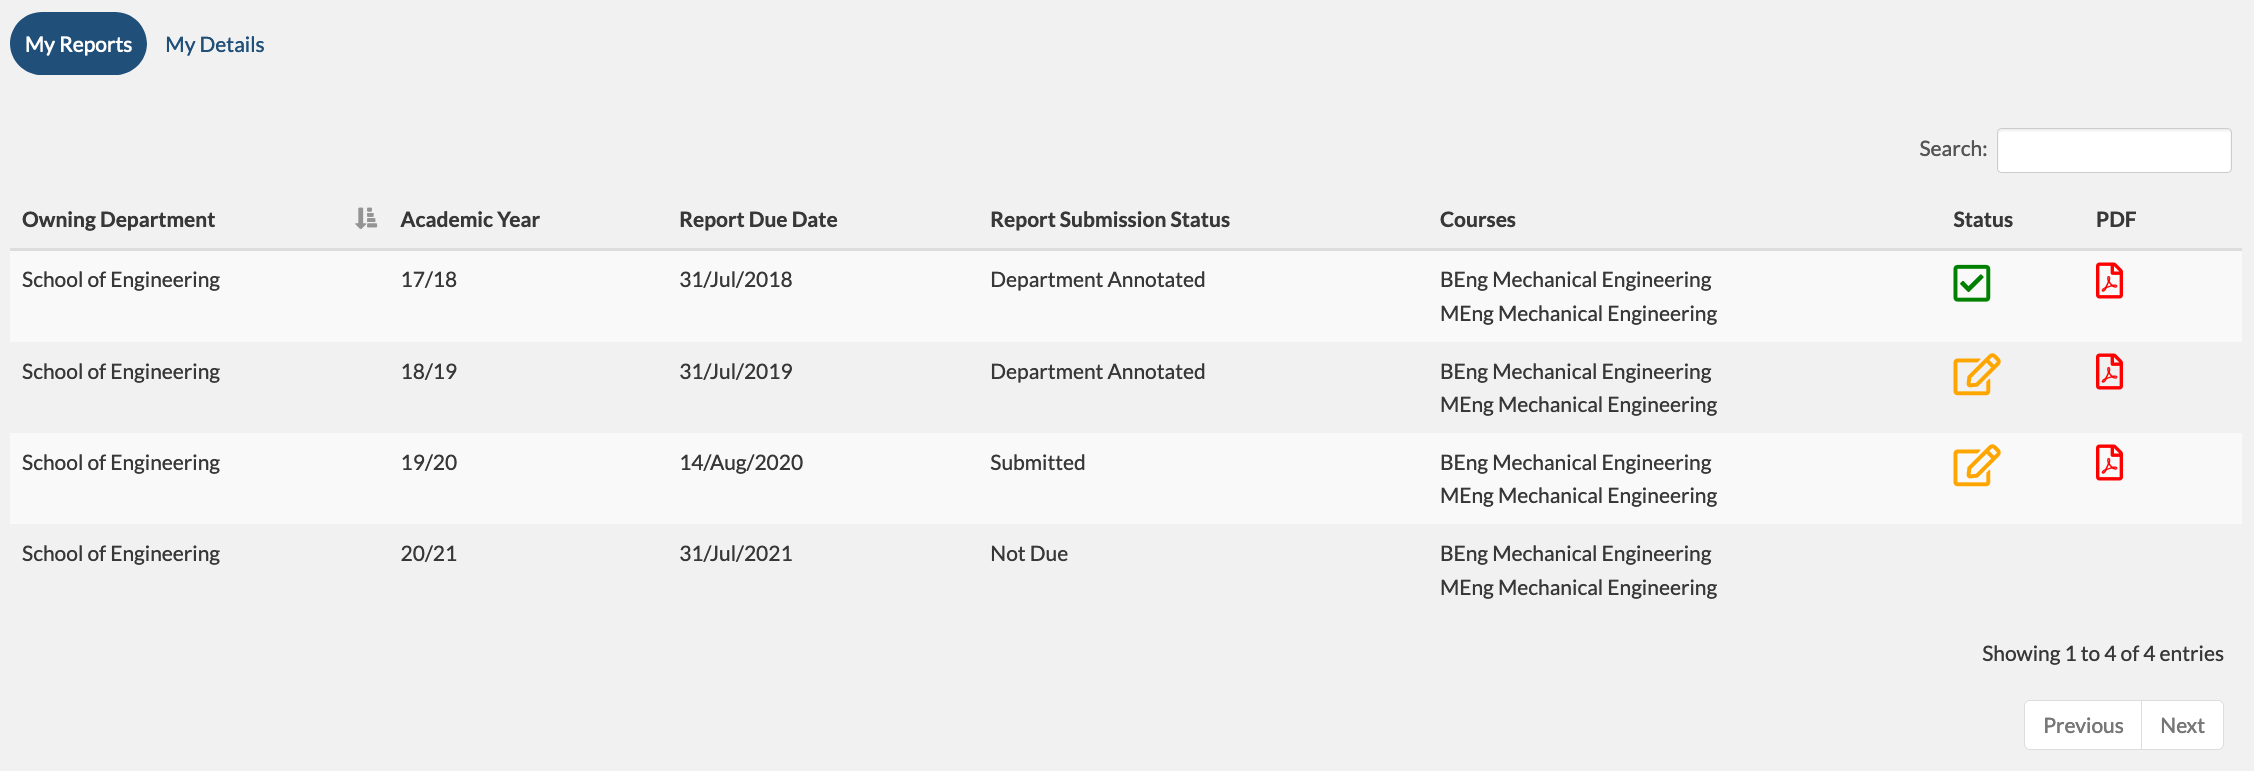 Screenshot displaying annual reports that are submitted and those that have received departmental responses.